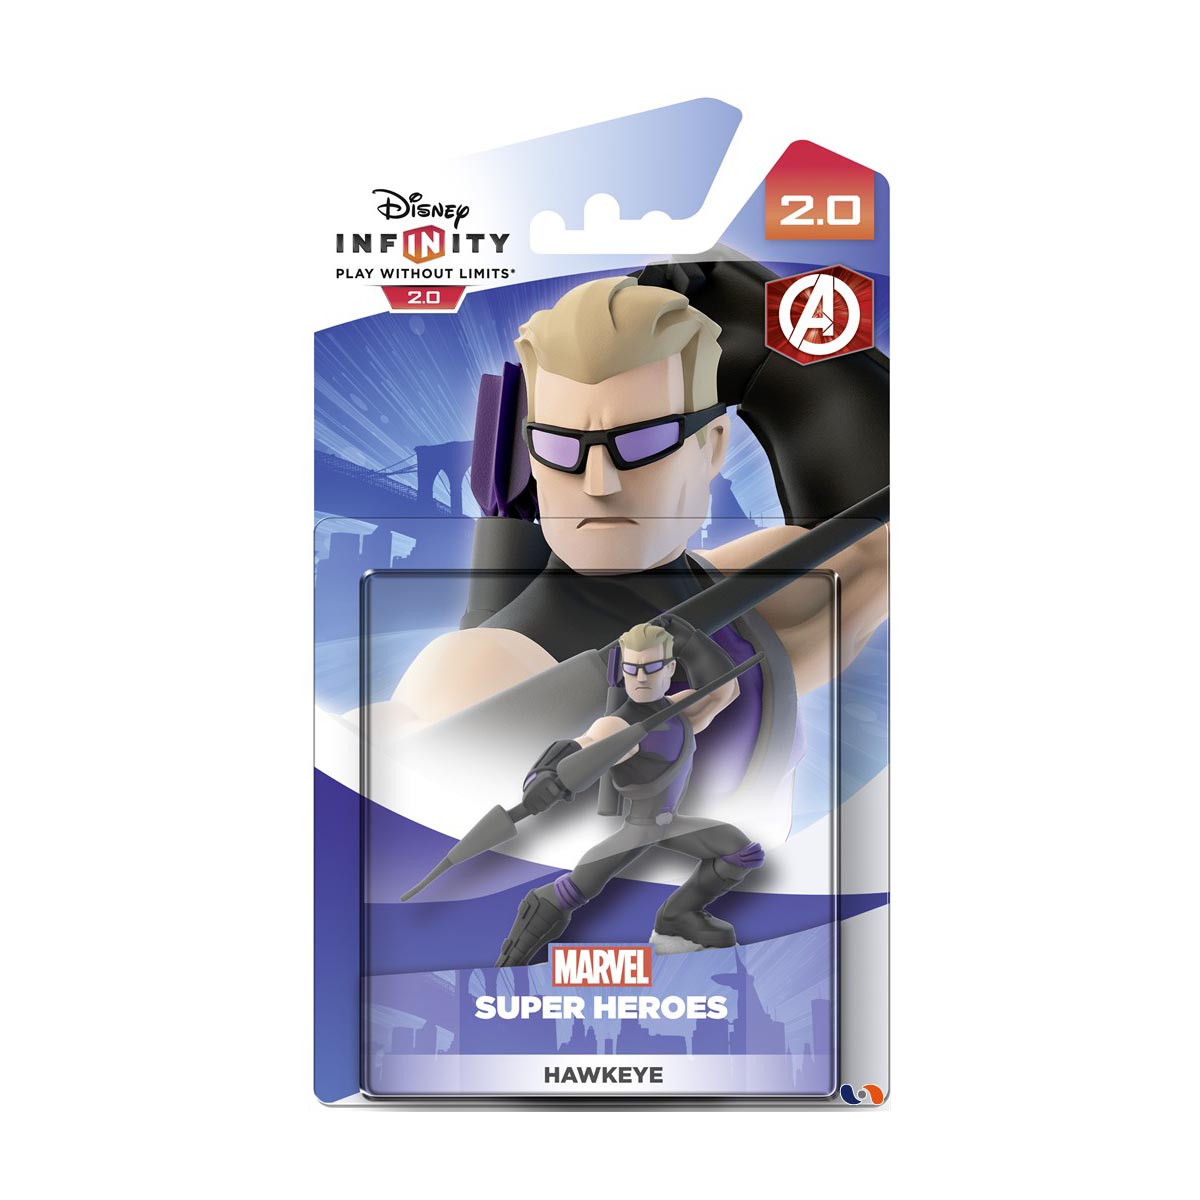 Occasion/Soldes  Figurine 'disney Infinity'  Woody  Priceminister, Fnac,